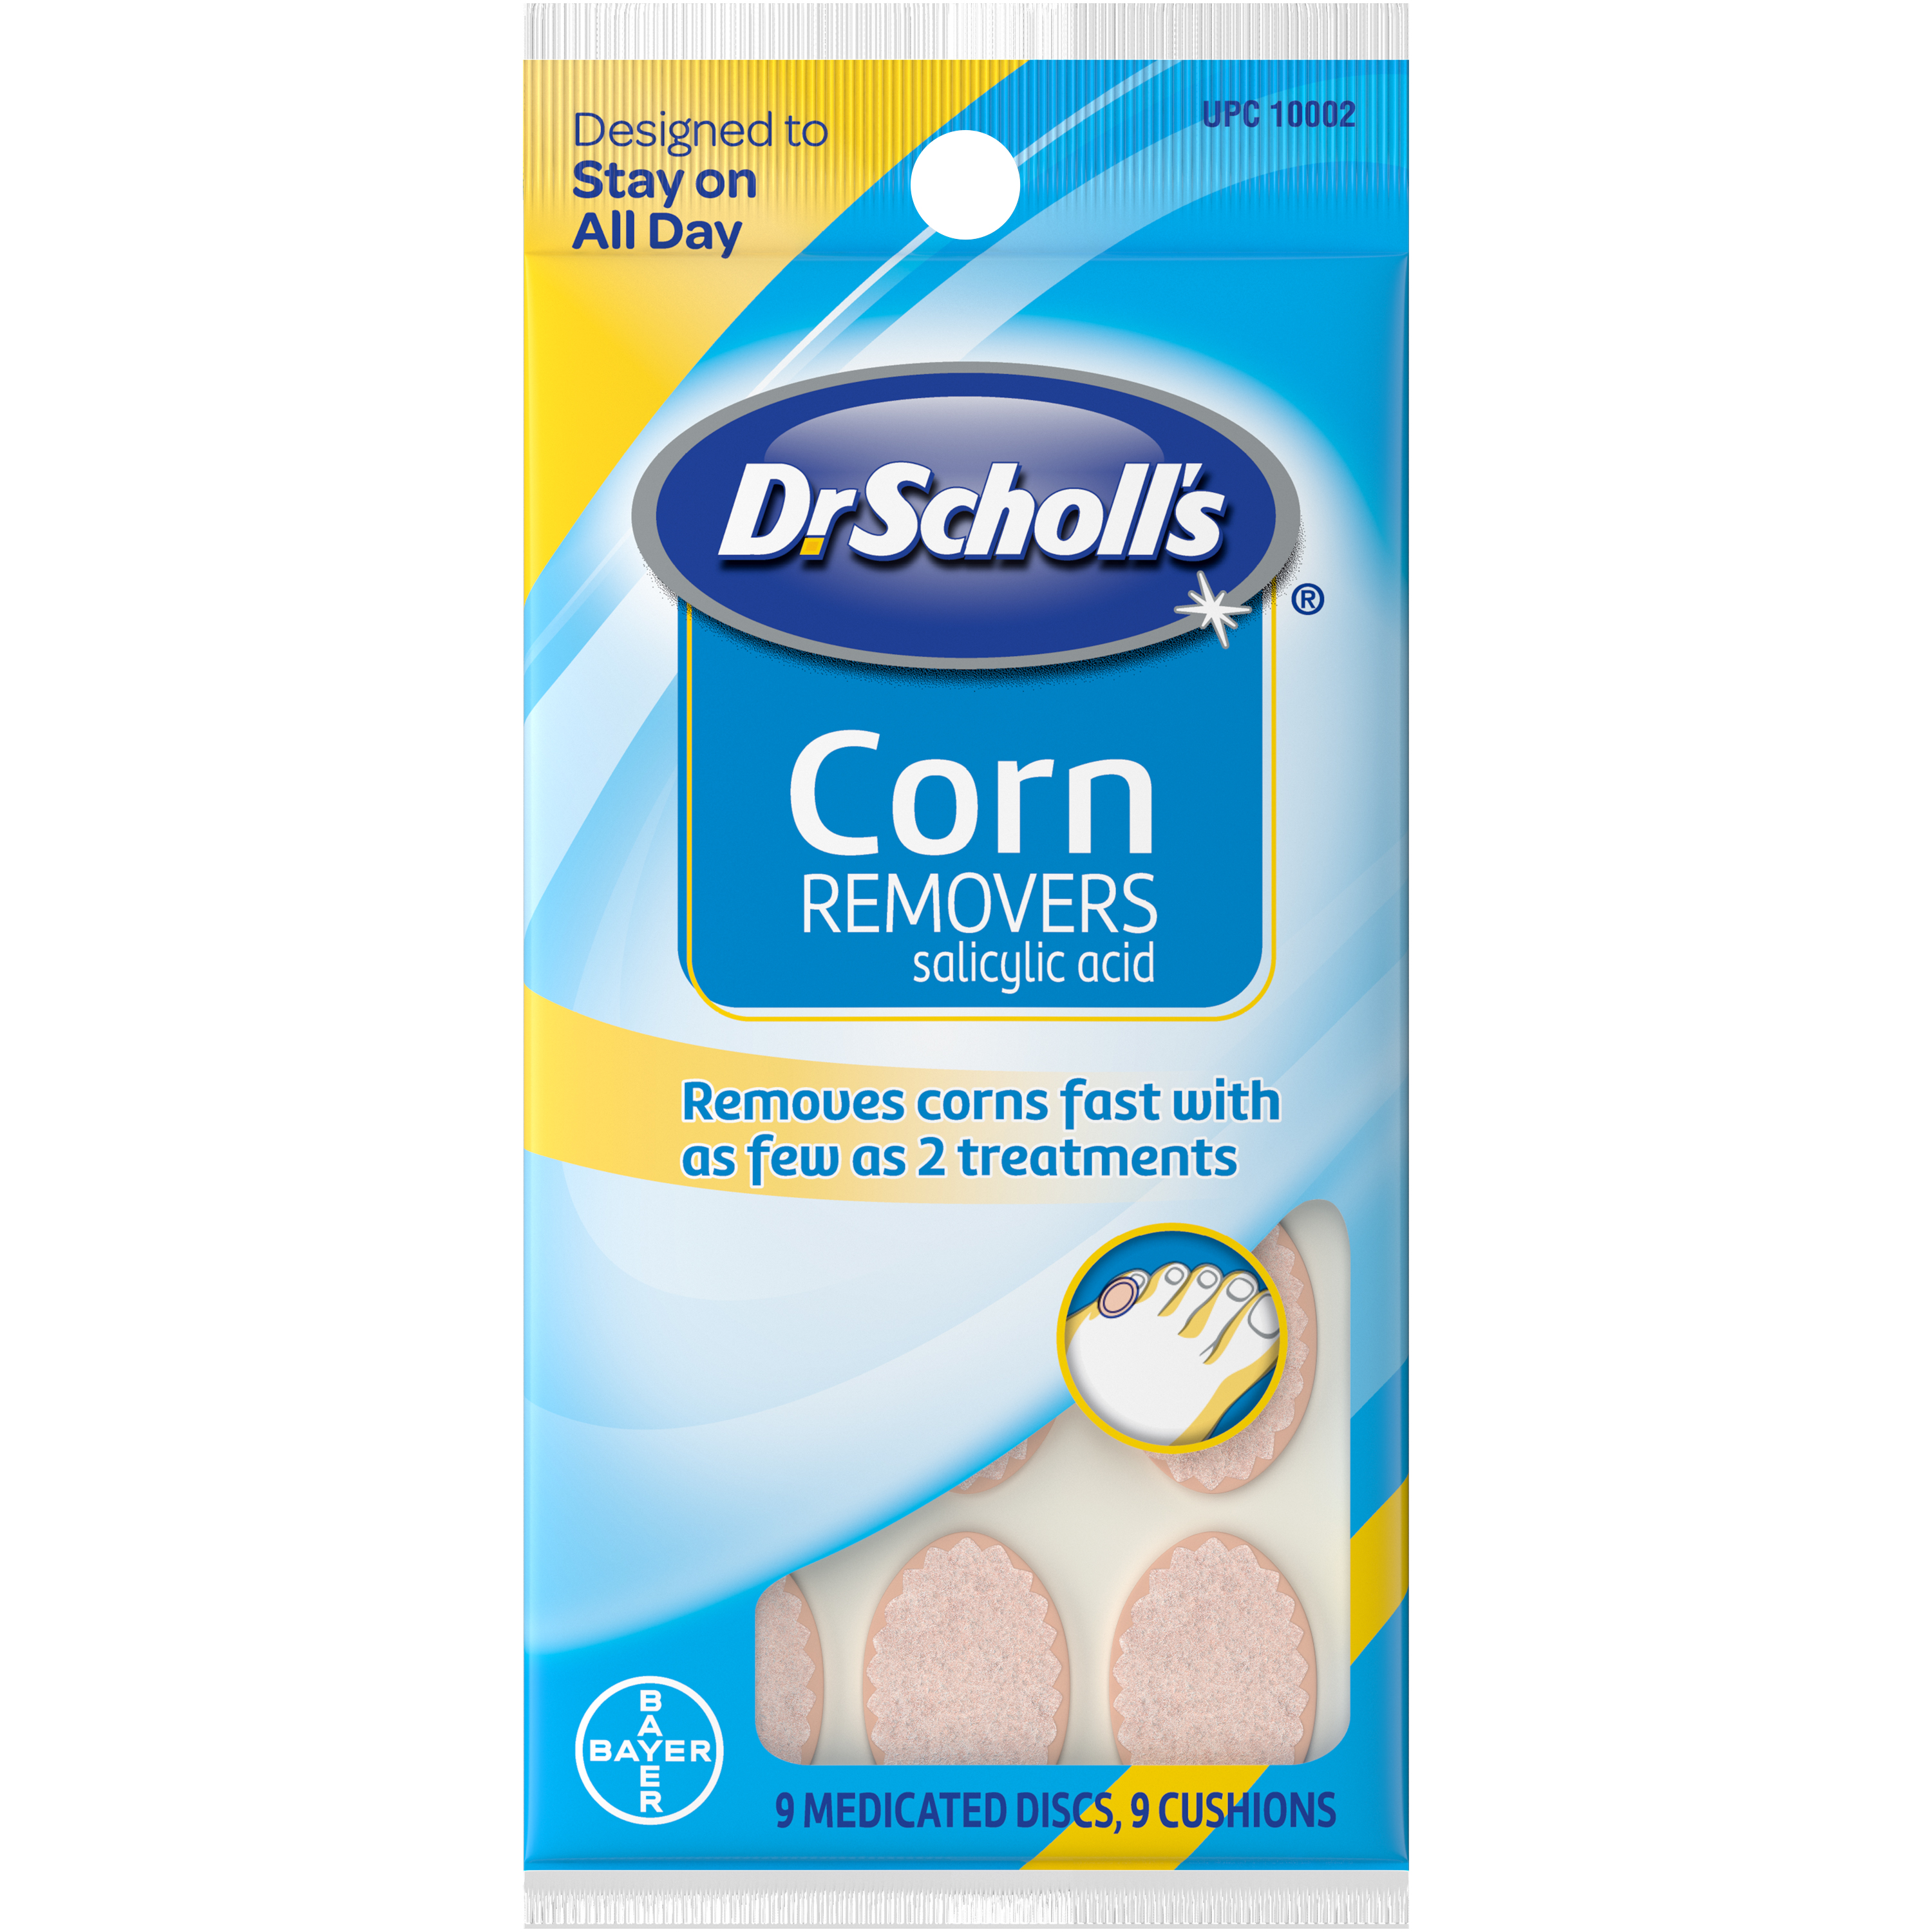 Dr. Scholl's Corn Removers, 9 Cushions, 9 Medicated Discs - image 4 of 8